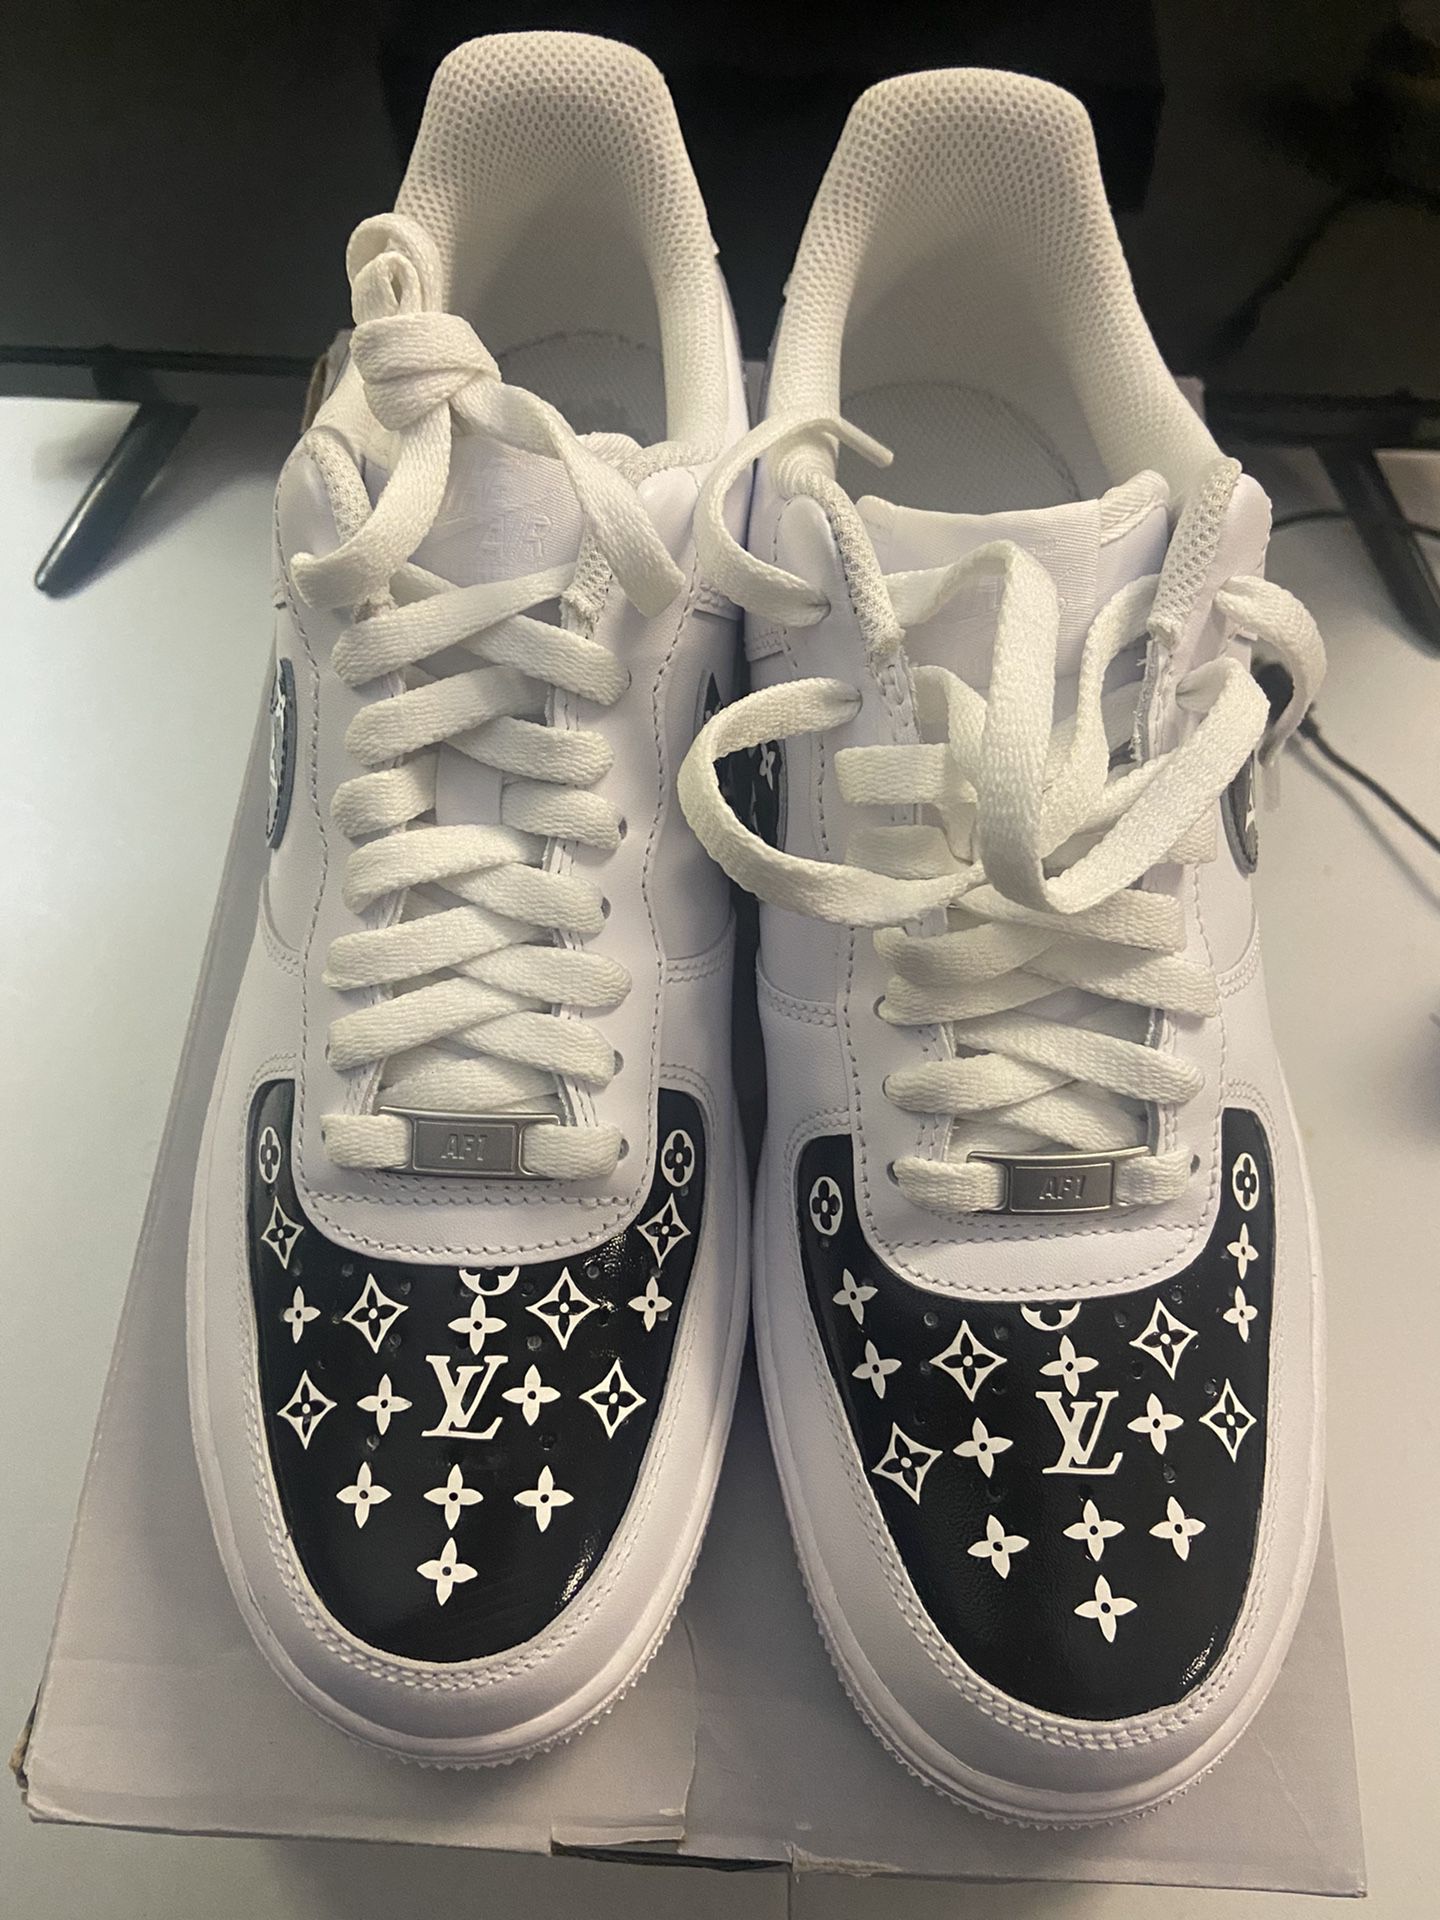 LV x Supreme Air Force 1s (Mids) for Sale in Aloha, OR - OfferUp